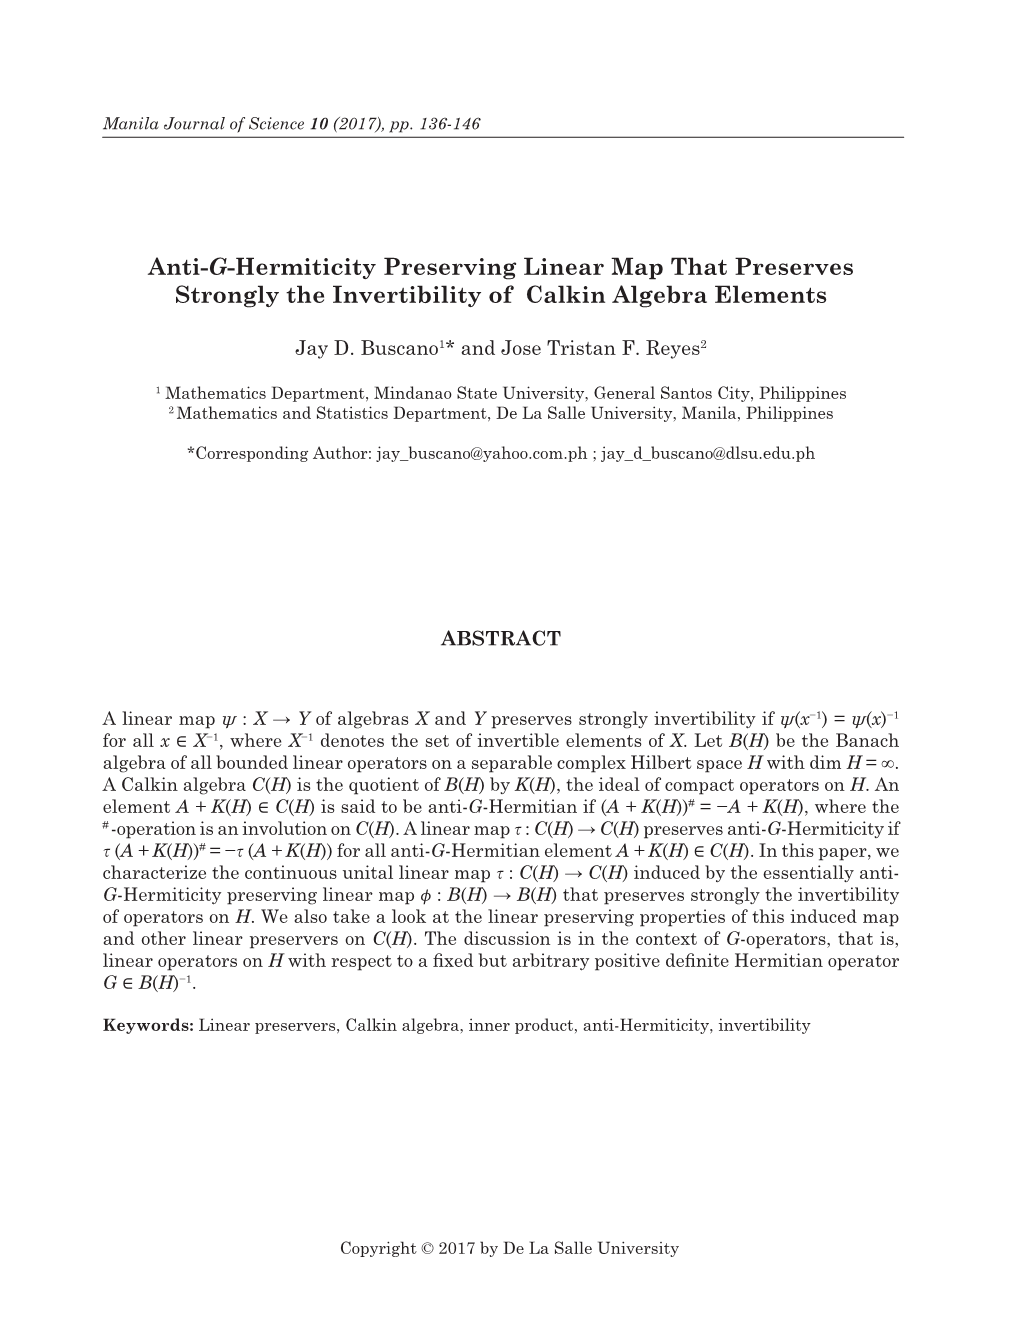 Anti-G-Hermiticity Preserving Linear Map That Preserves Strongly the Invertibility of Calkin Algebra Elements